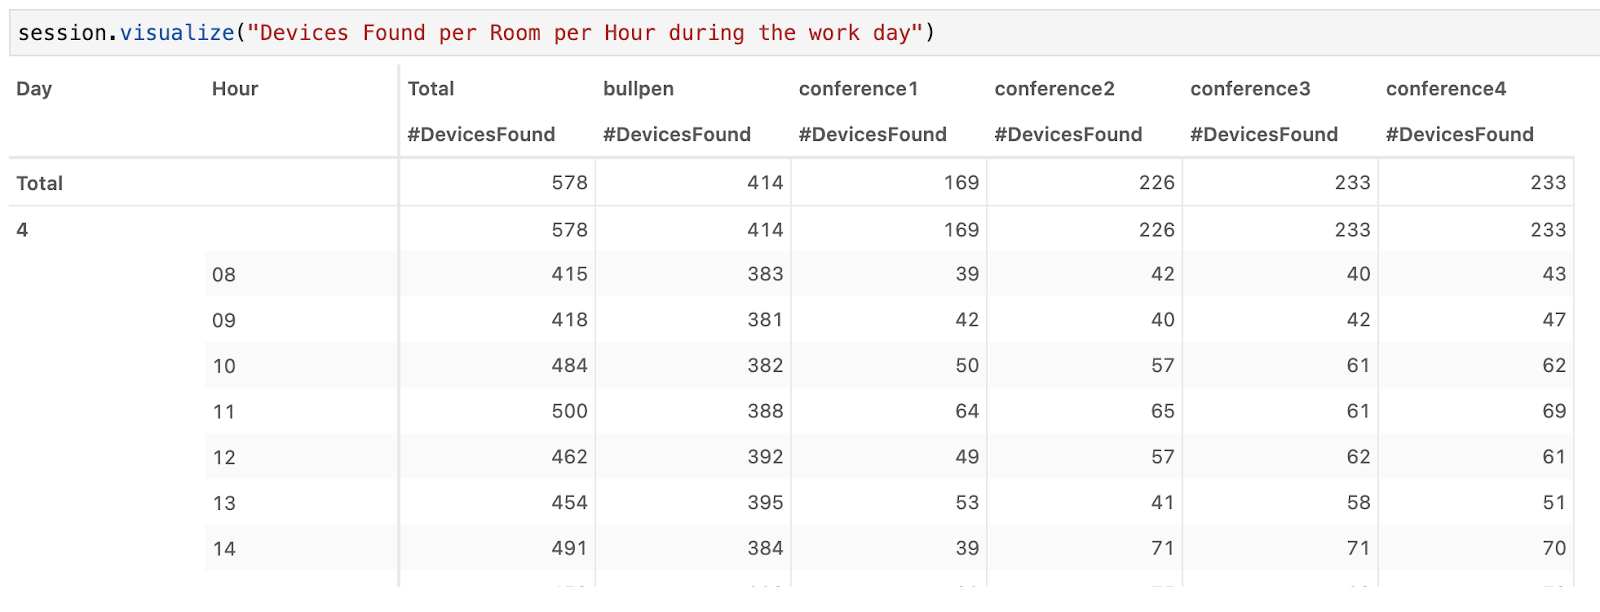 IoT devices per room per hour table, during workday hours